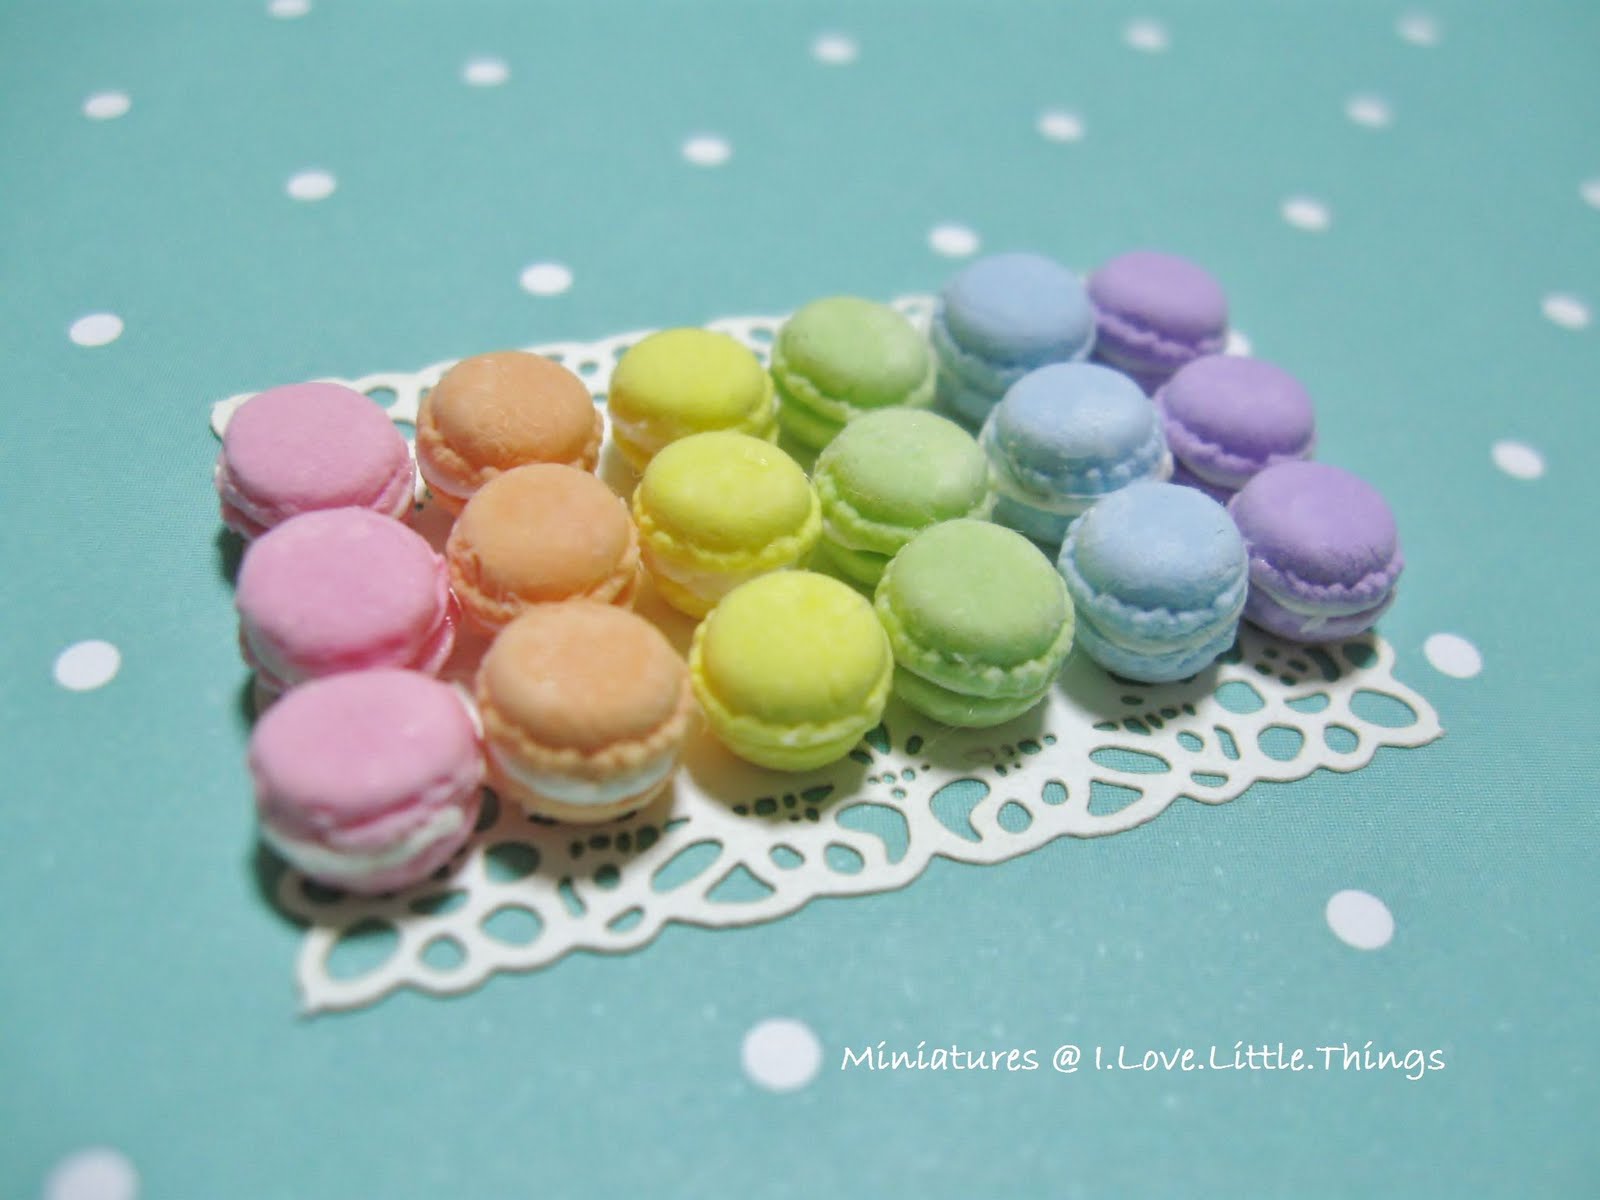 Miniatures by I Love Little Things: Rainbow macarons & Merry Christmas!